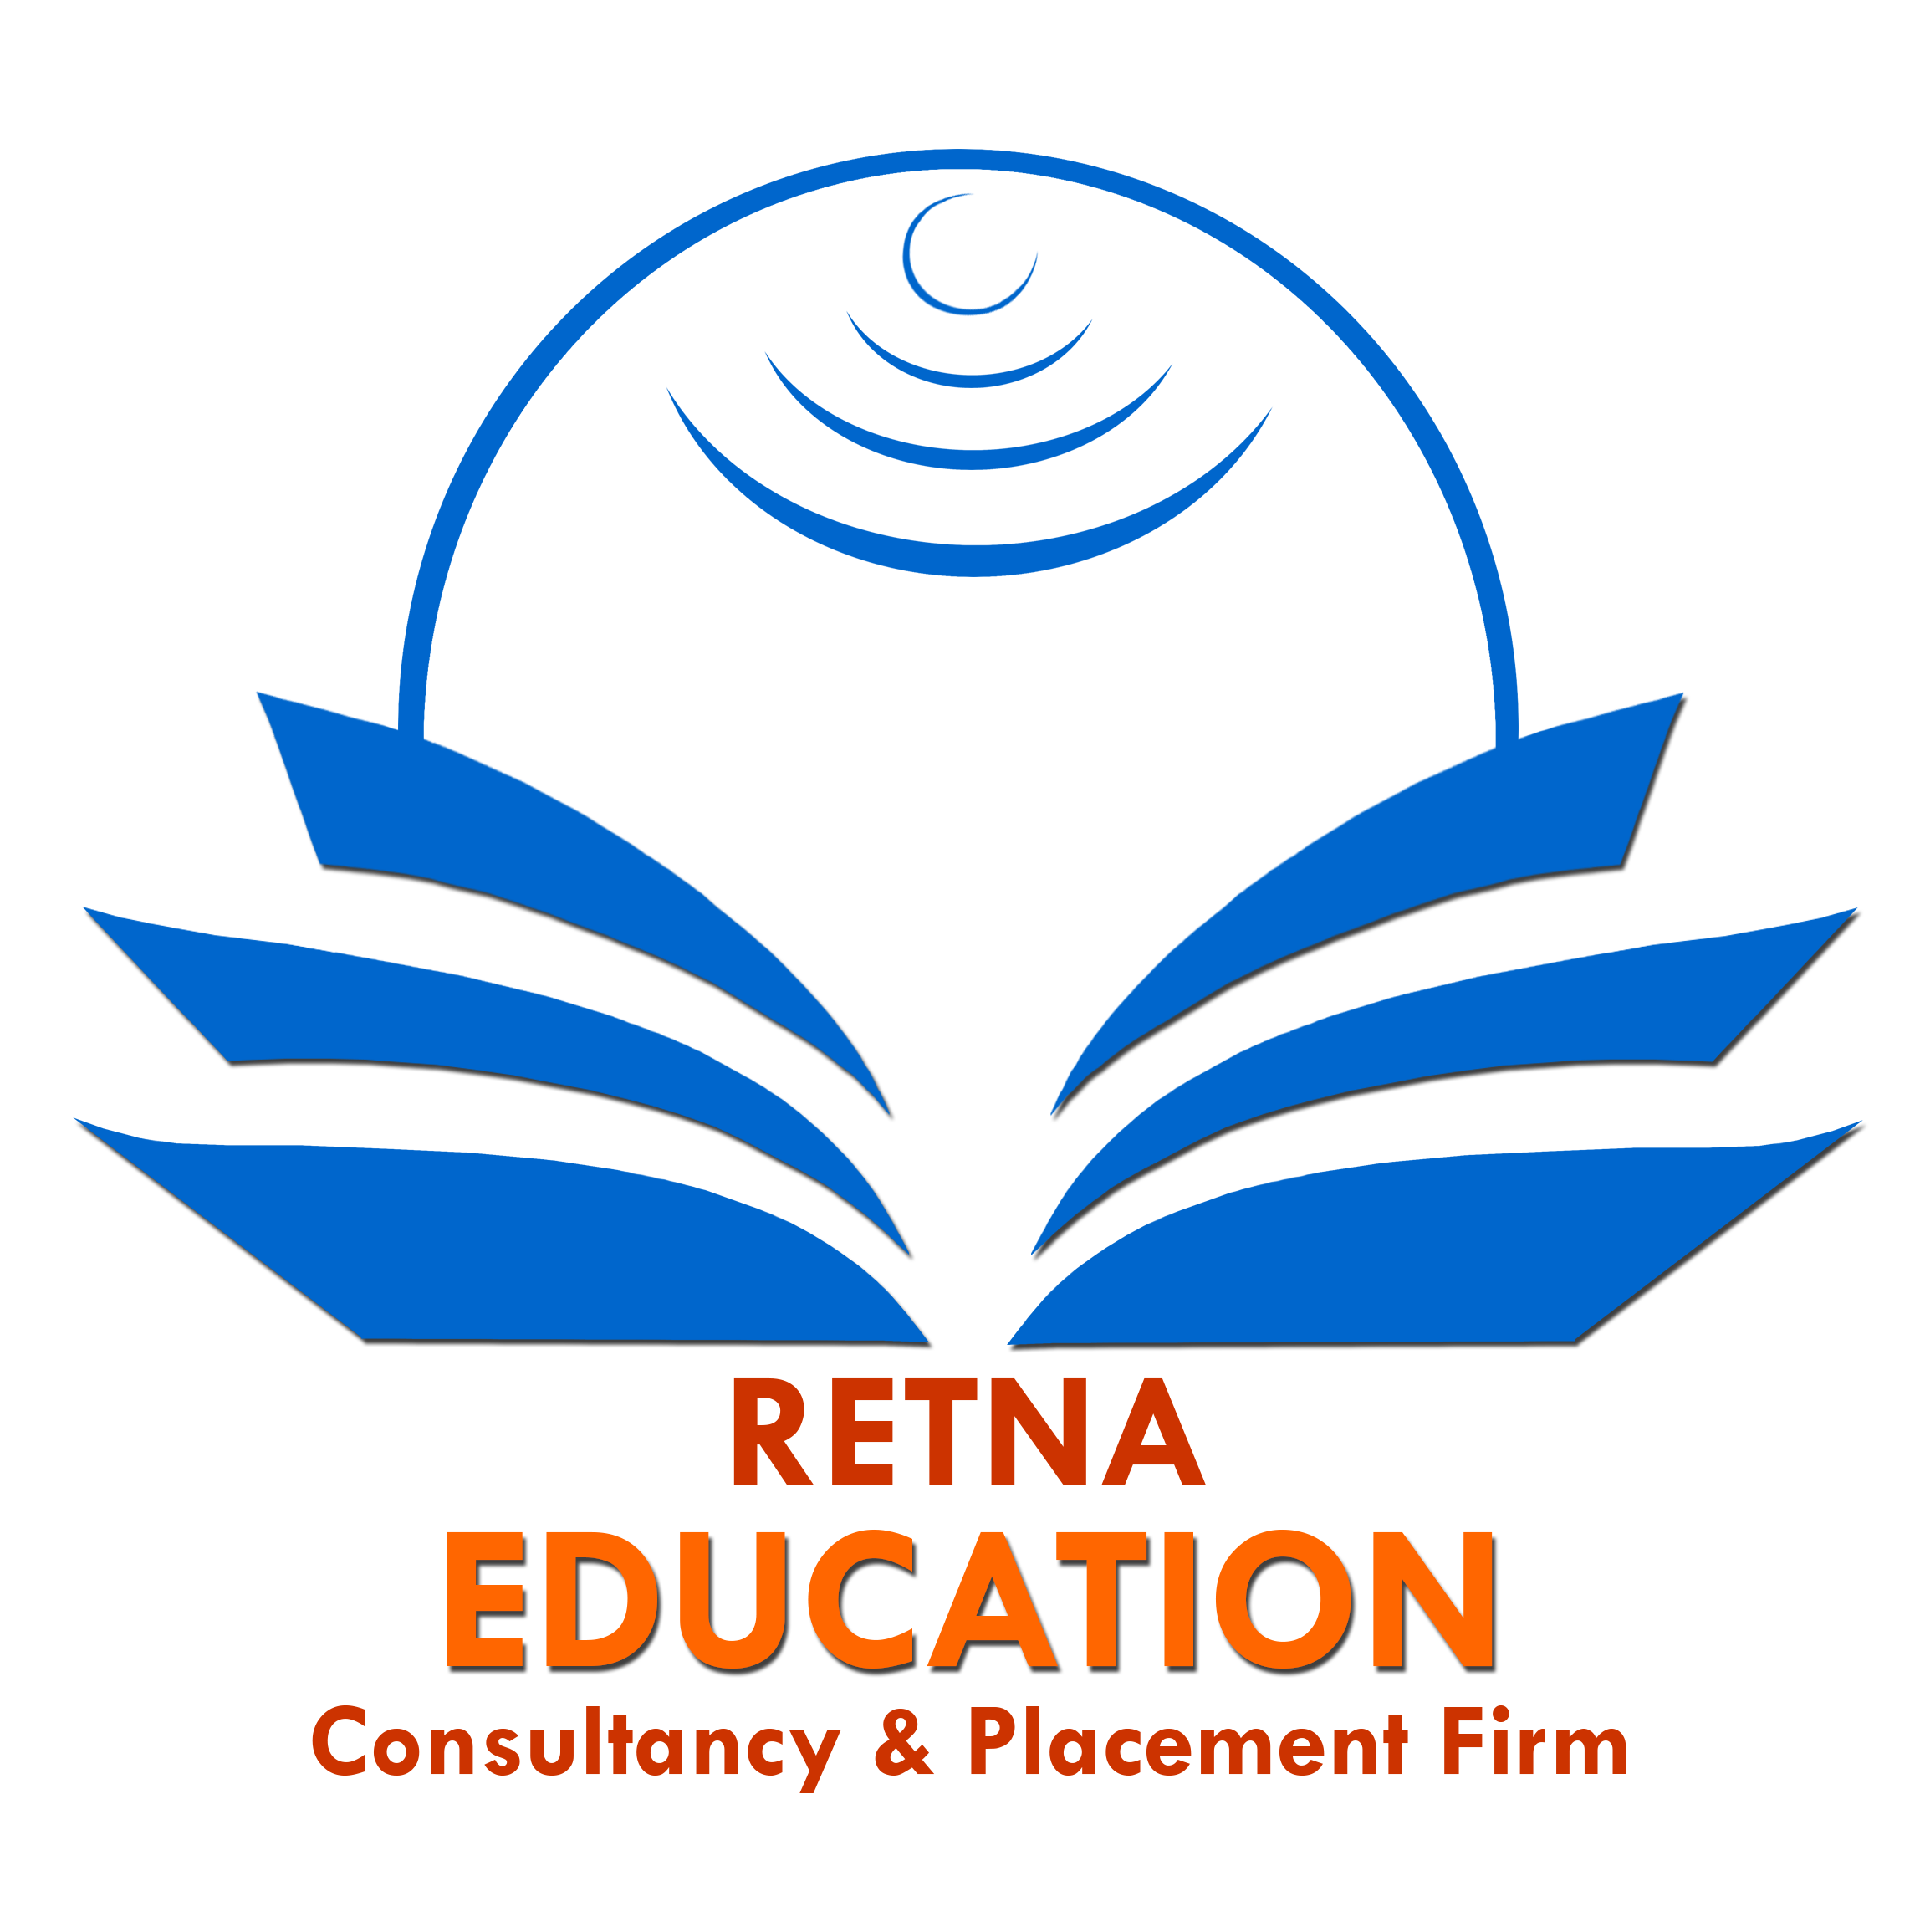 RETNA Training Consultancy and Placement Firm